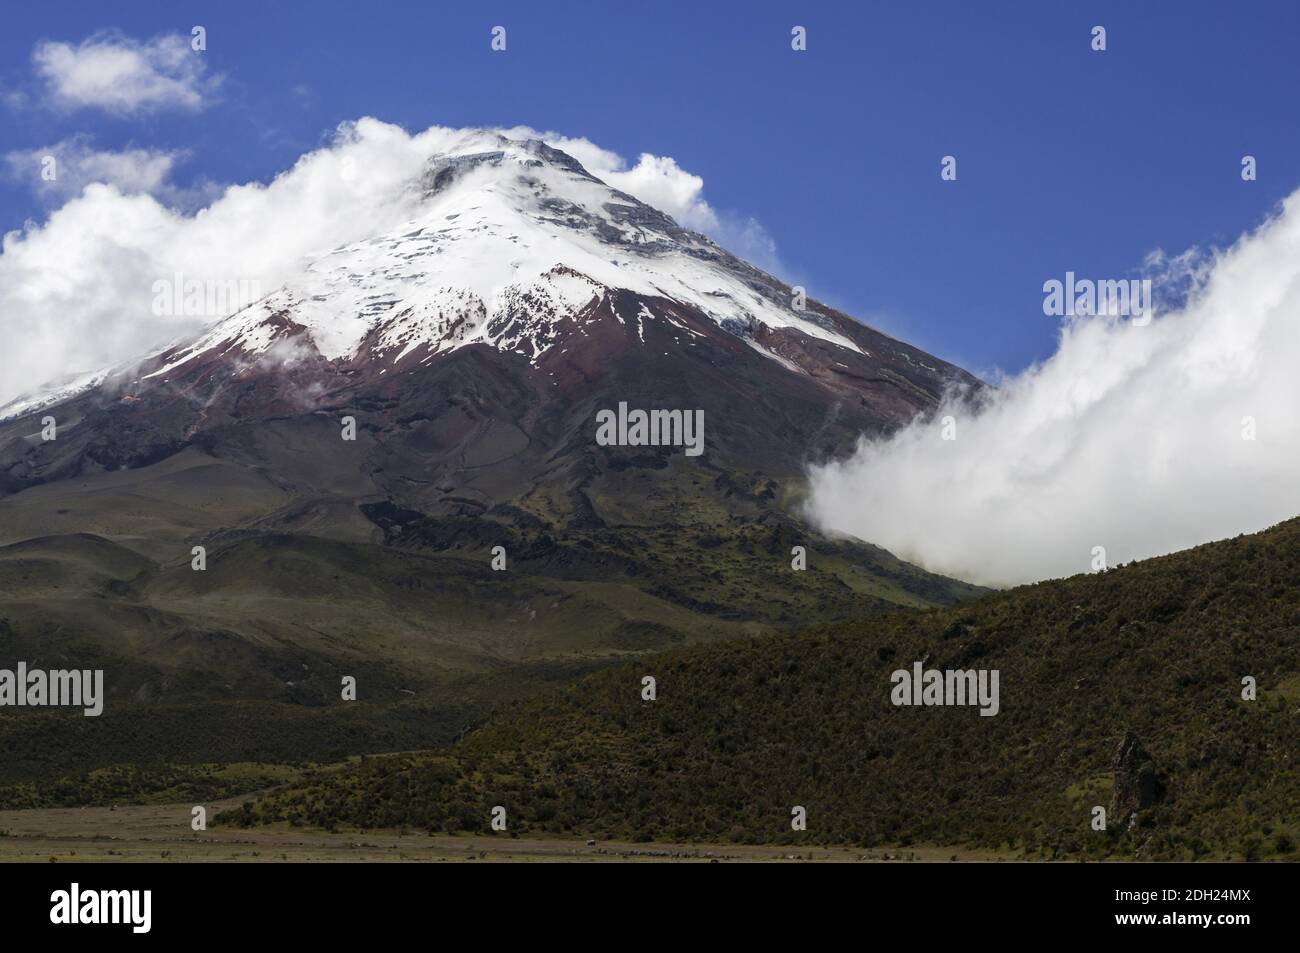 Cotopaxi stratovolcano in the Andes of Ecuador, South America. Stock Photo